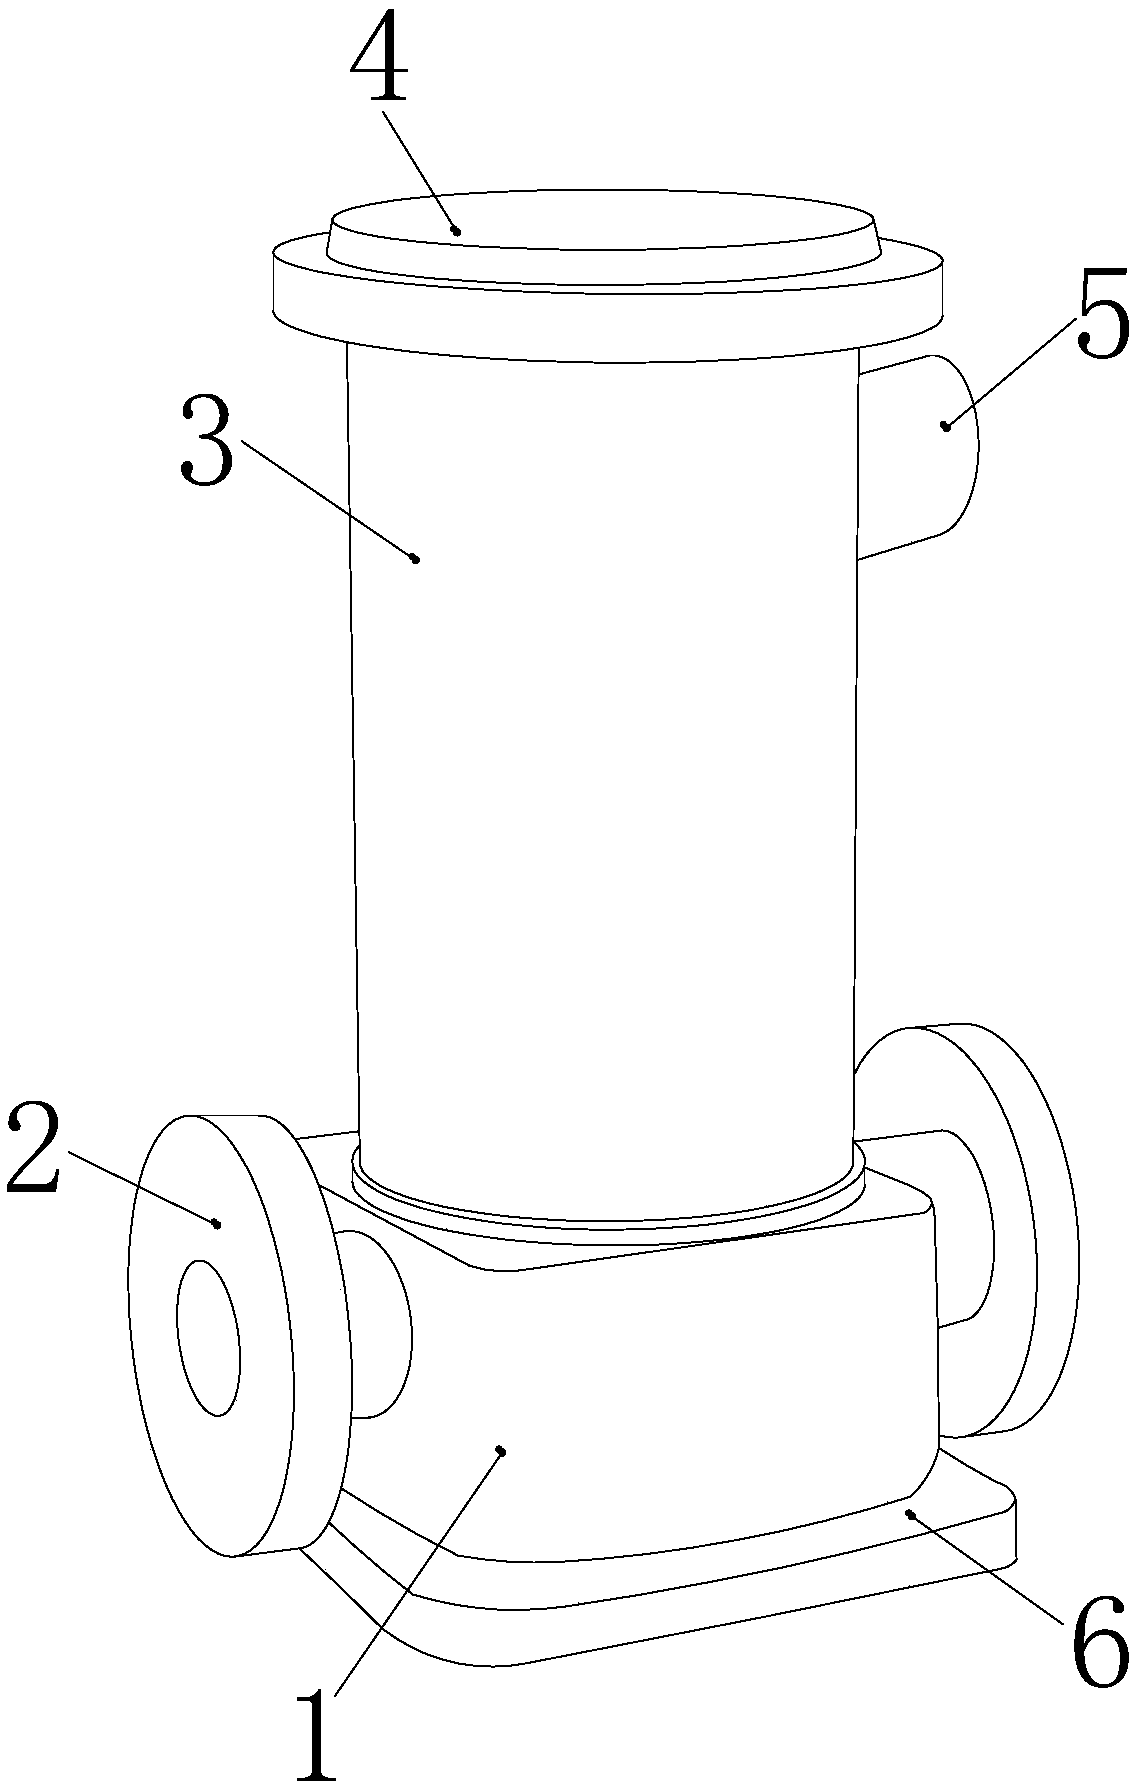 Novel fire water supply and drainage device